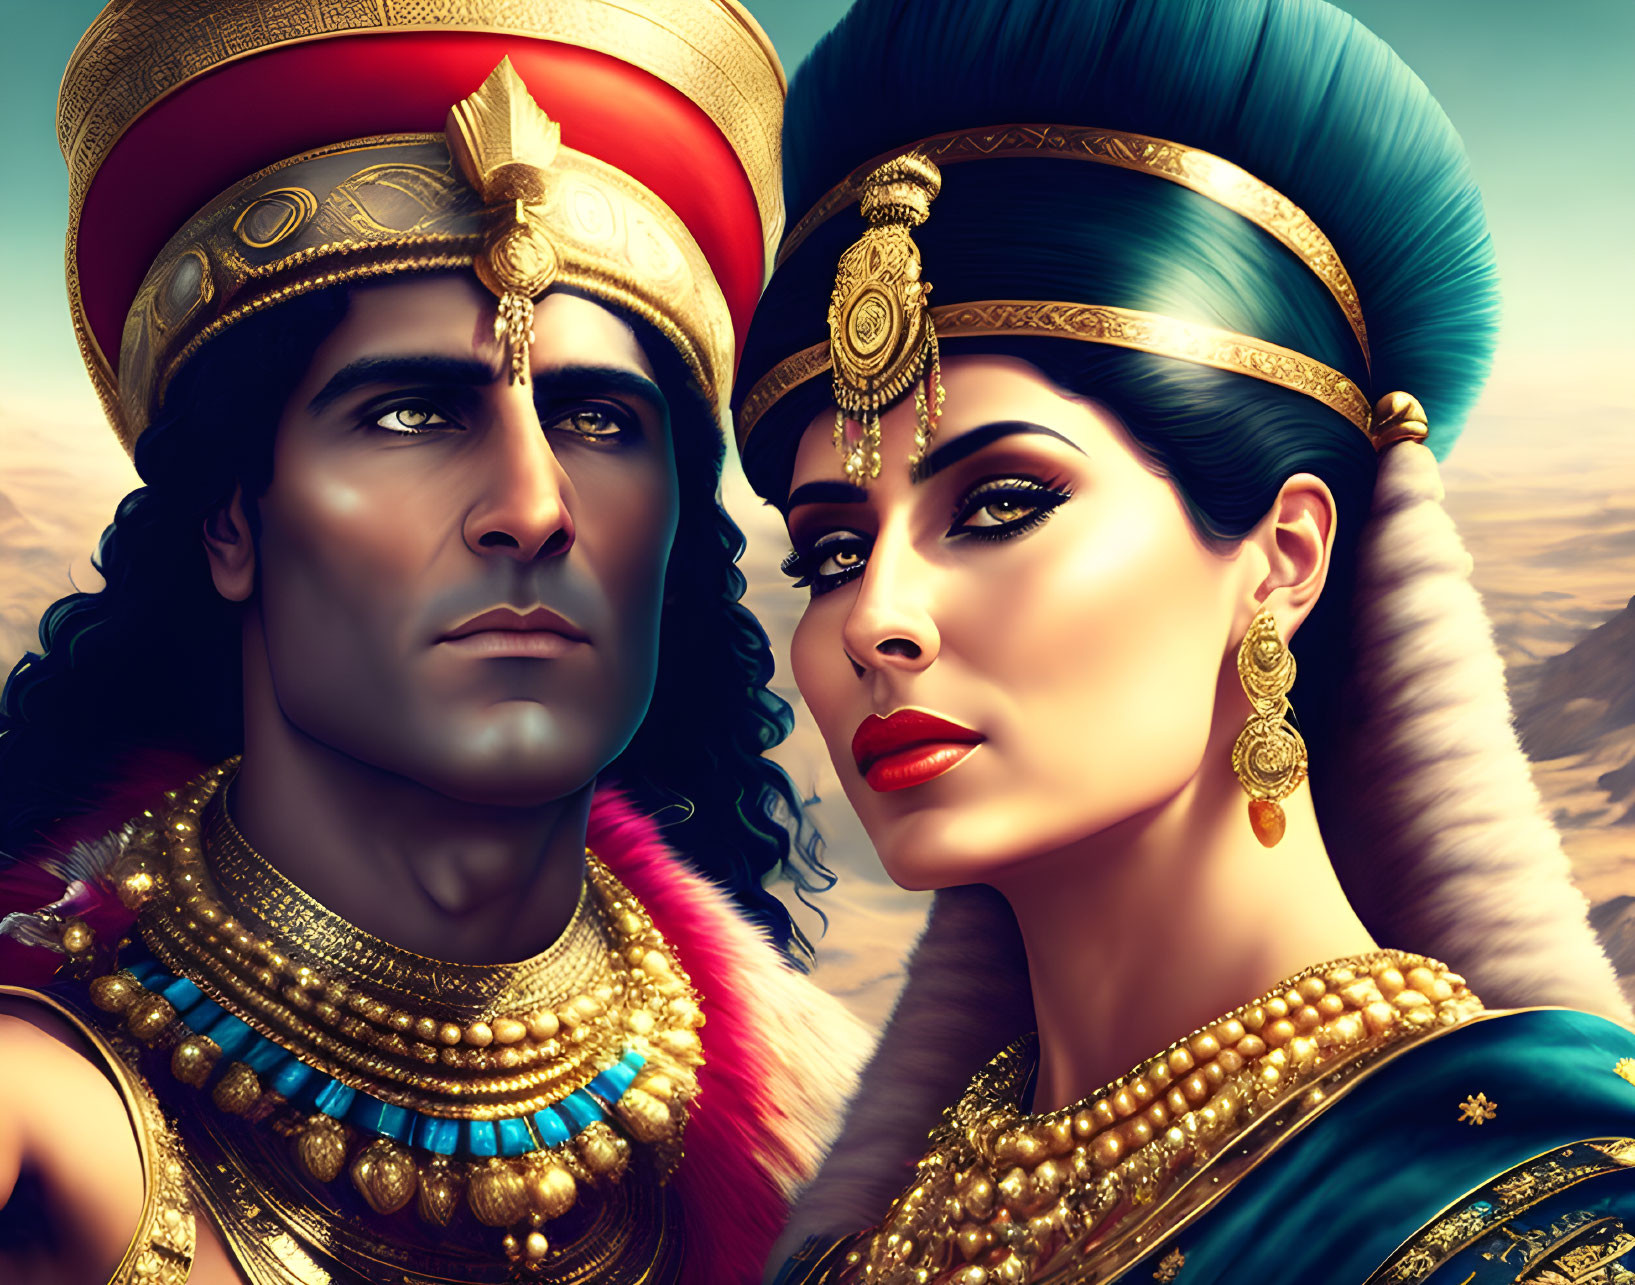 Ancient Egyptian man and woman in regal attire with intricate jewelry and headdresses